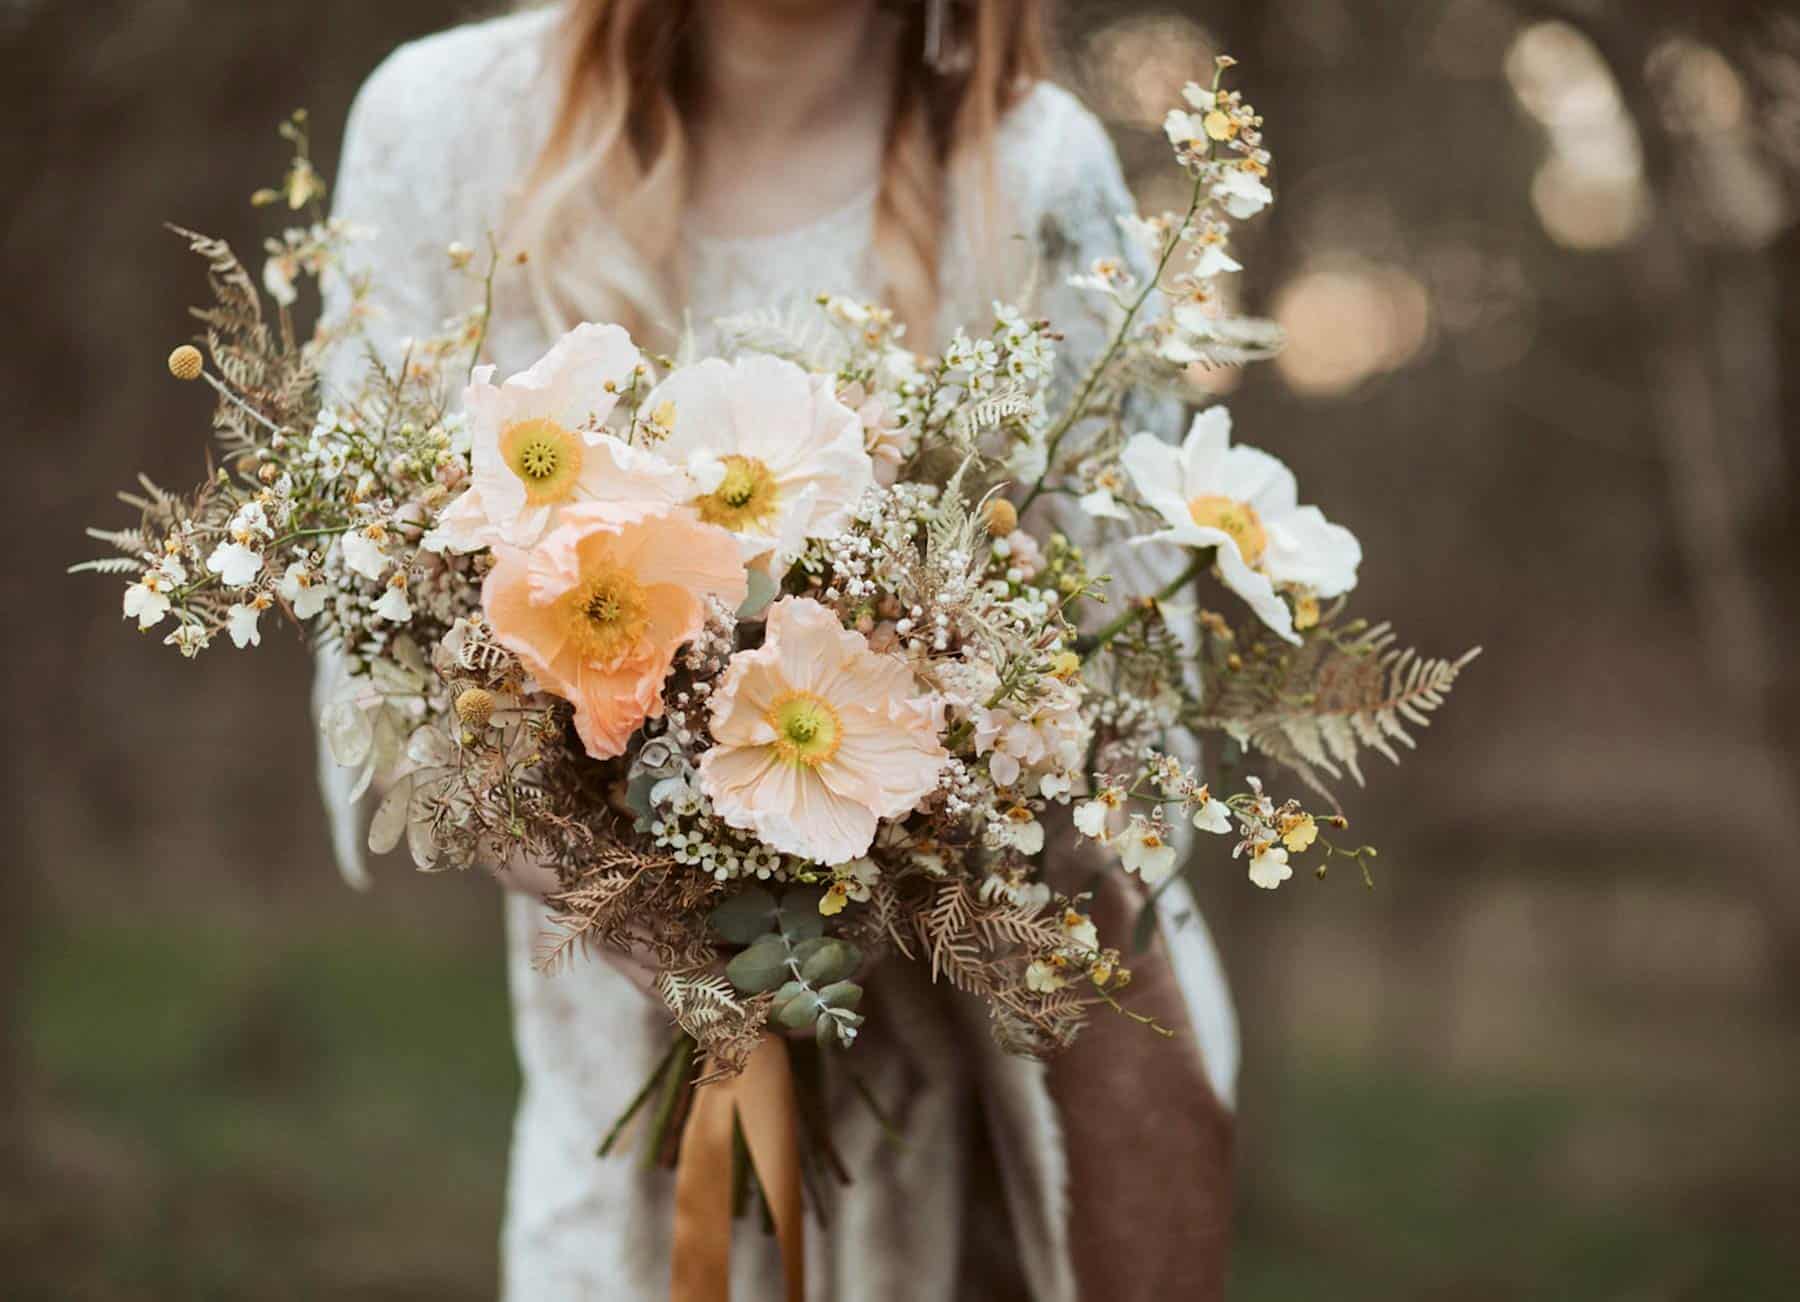 peach toned bridal bouquet with poppies and dried ingredients